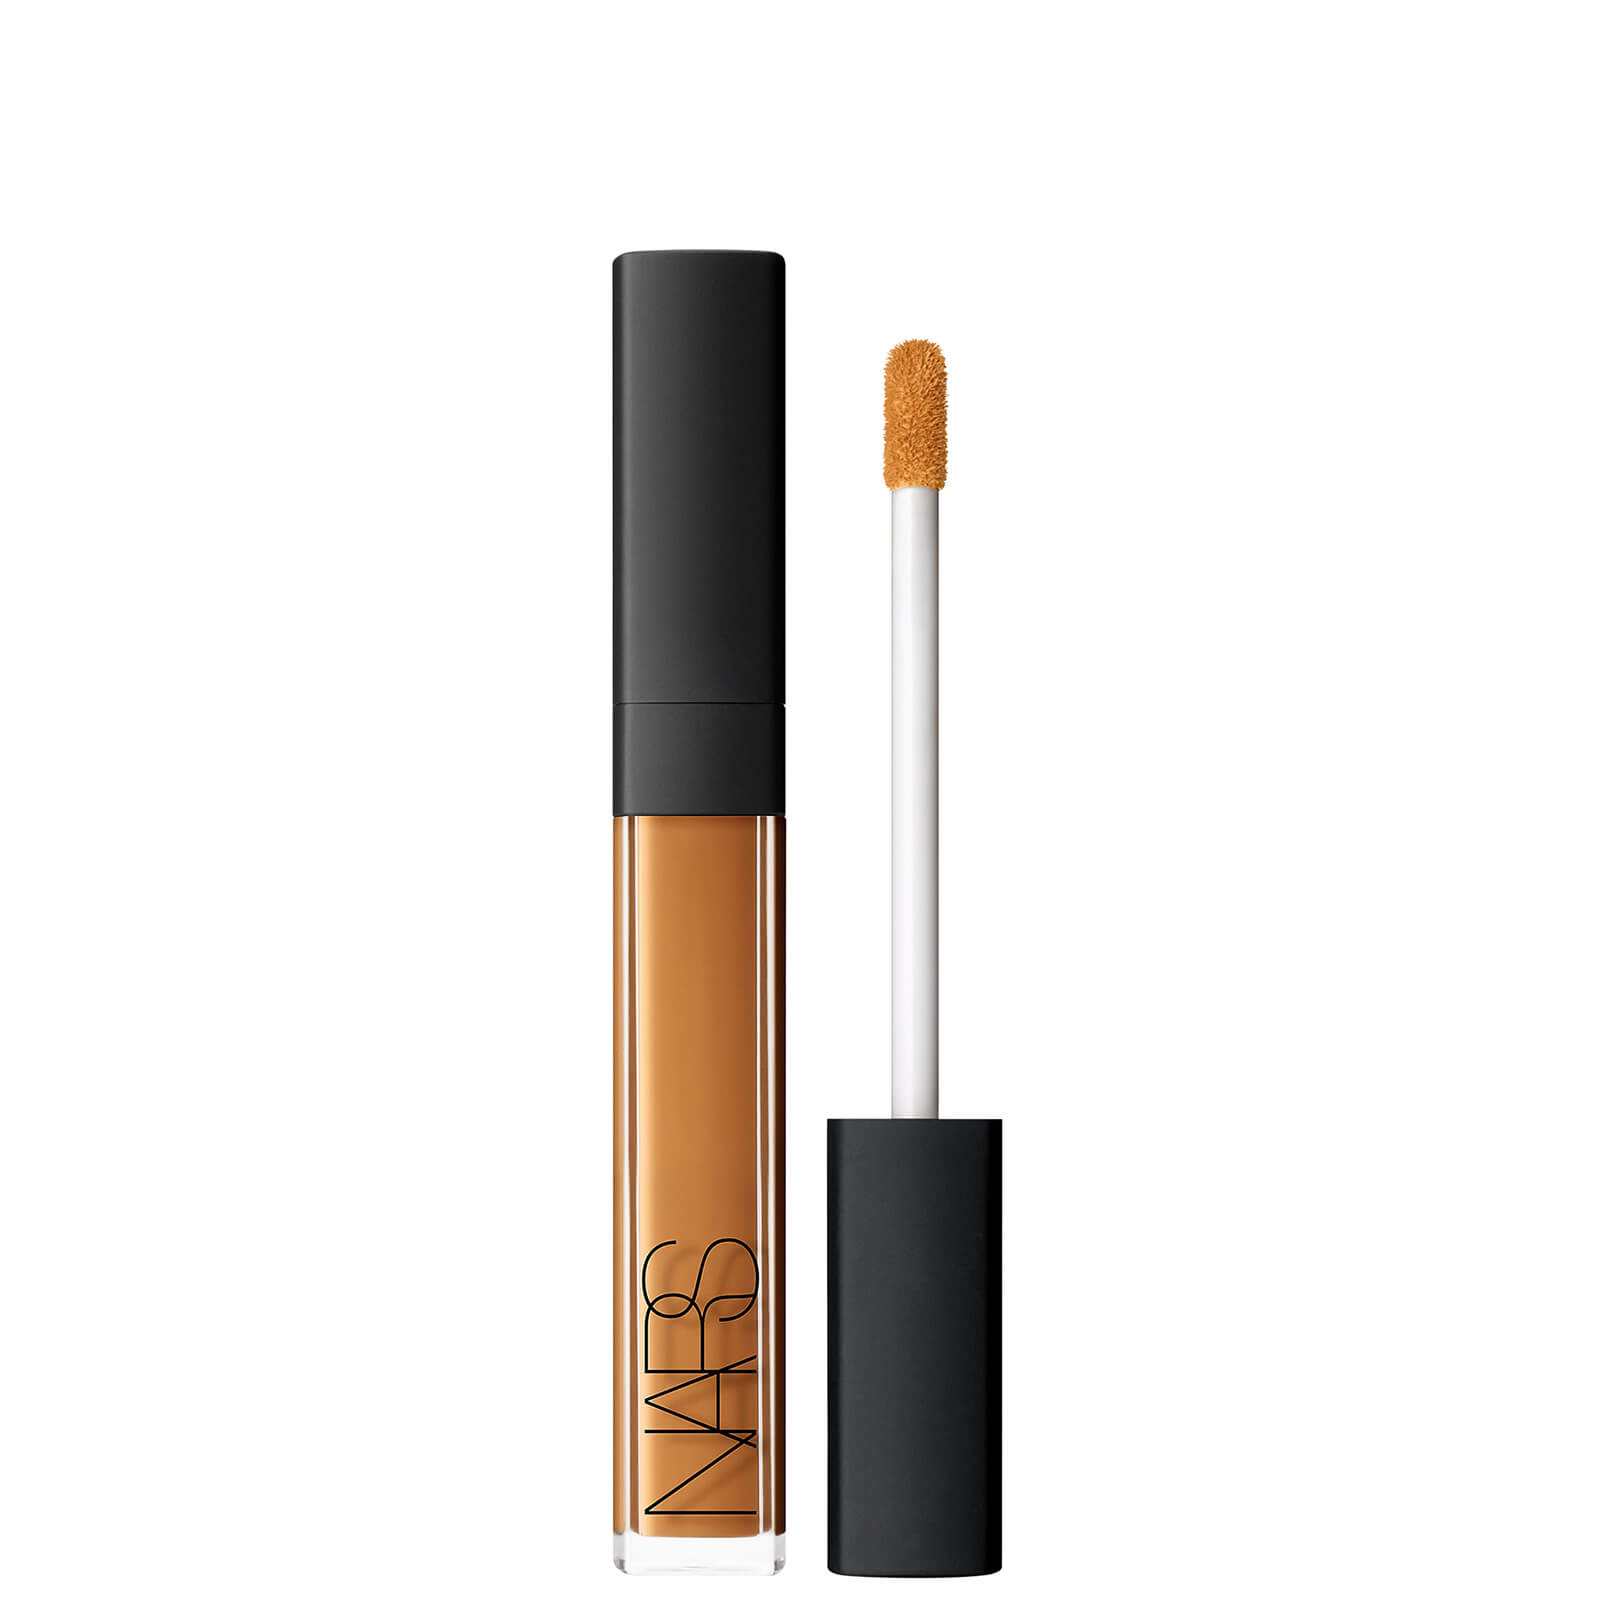 NARS Cosmetics Radiant Creamy Concealer (Various Shades) - Truffle